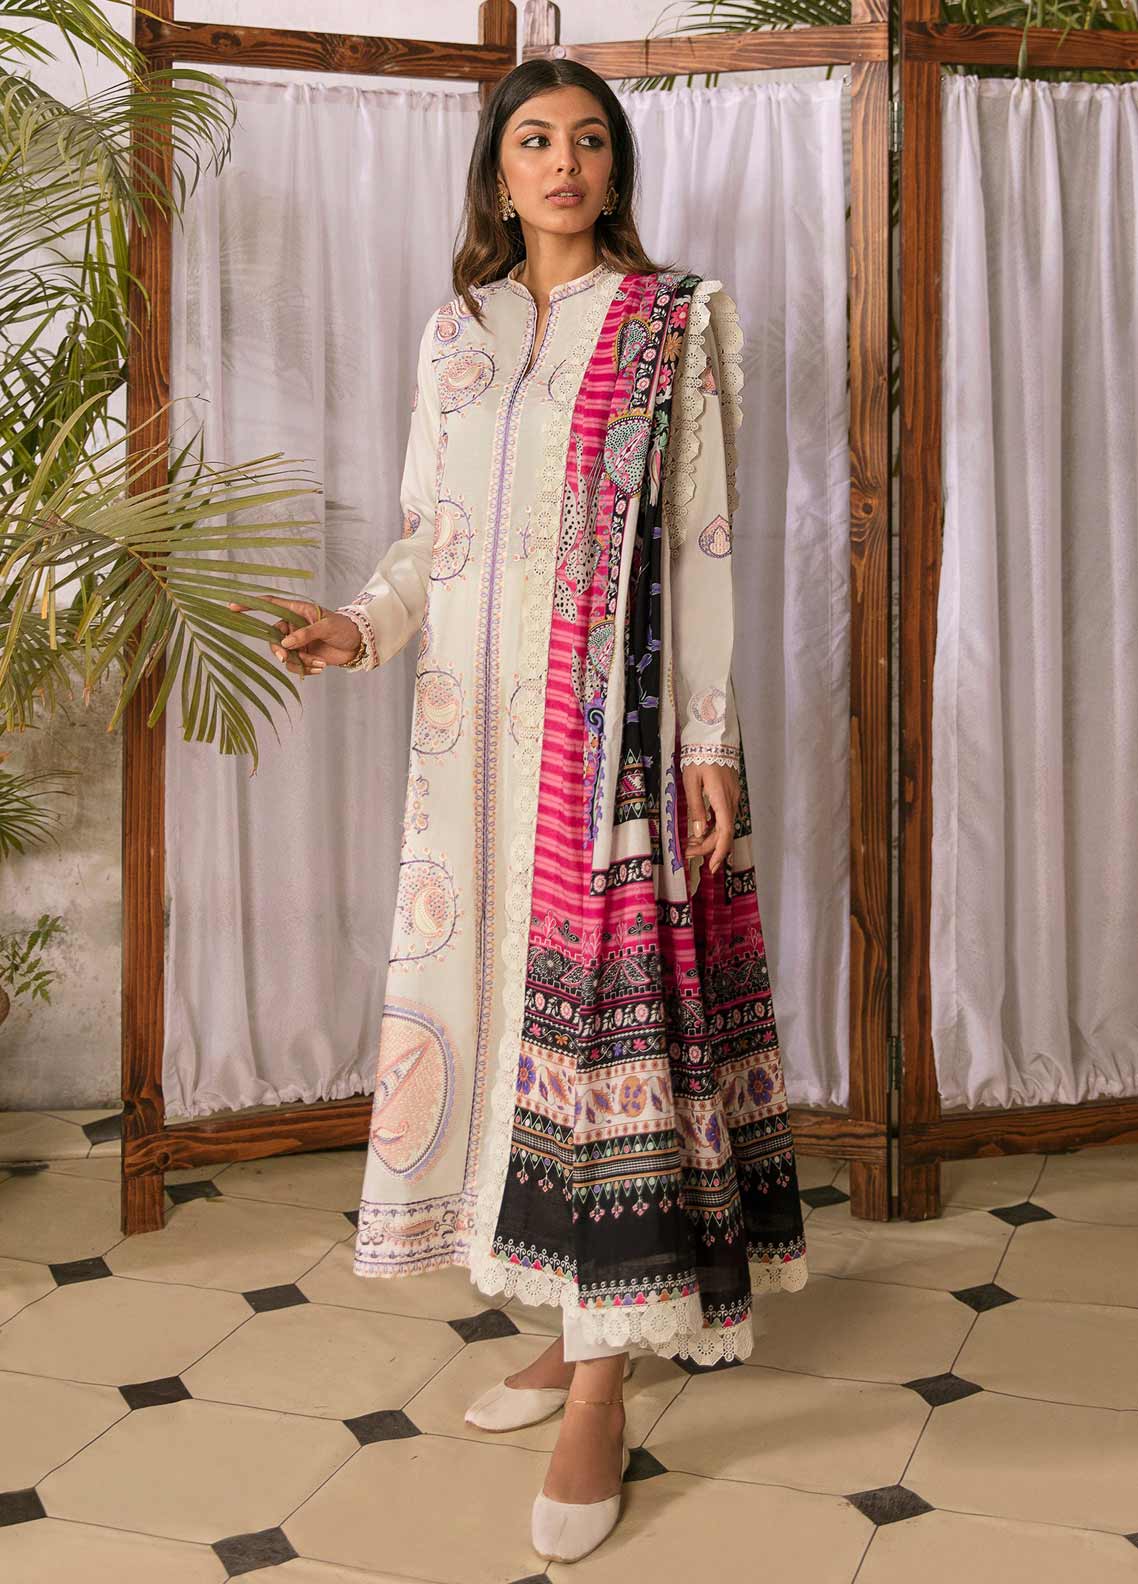 Zaha by Khadijah Shah Embroidered Lawn Unstitched 3 Piece Suit 01-A ...